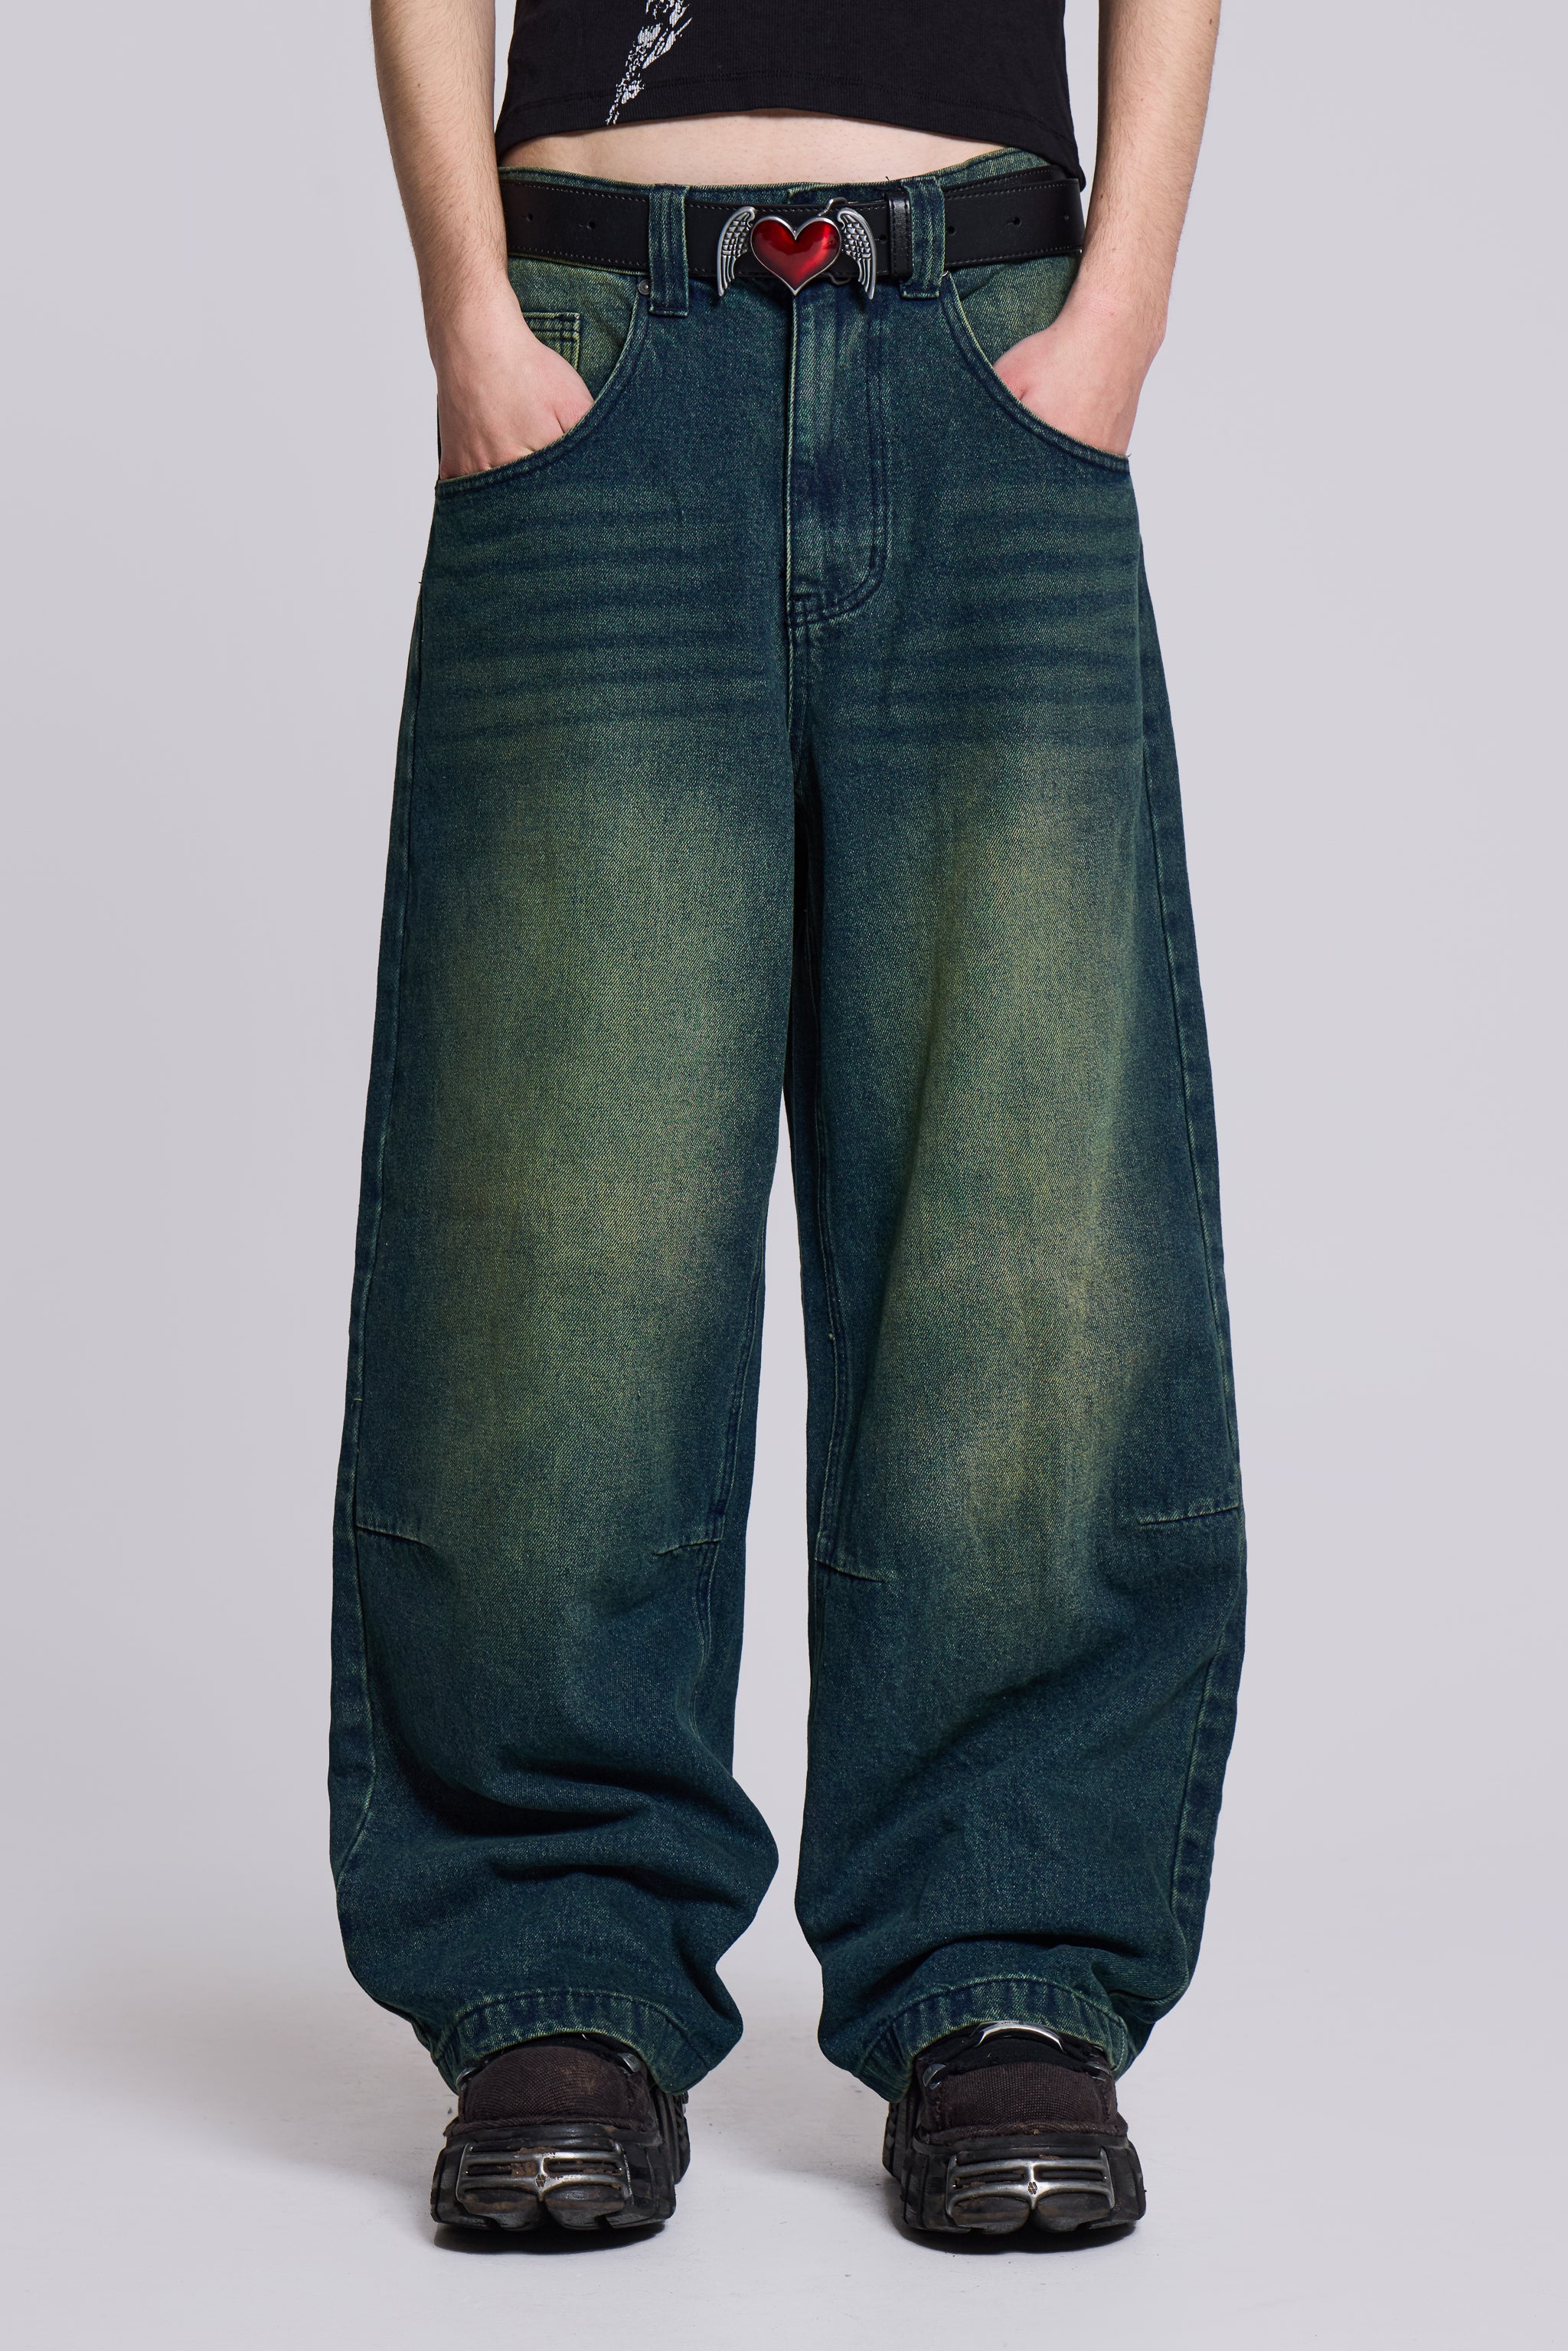 Extreme Ripped Sand Blasted Denim Jeans